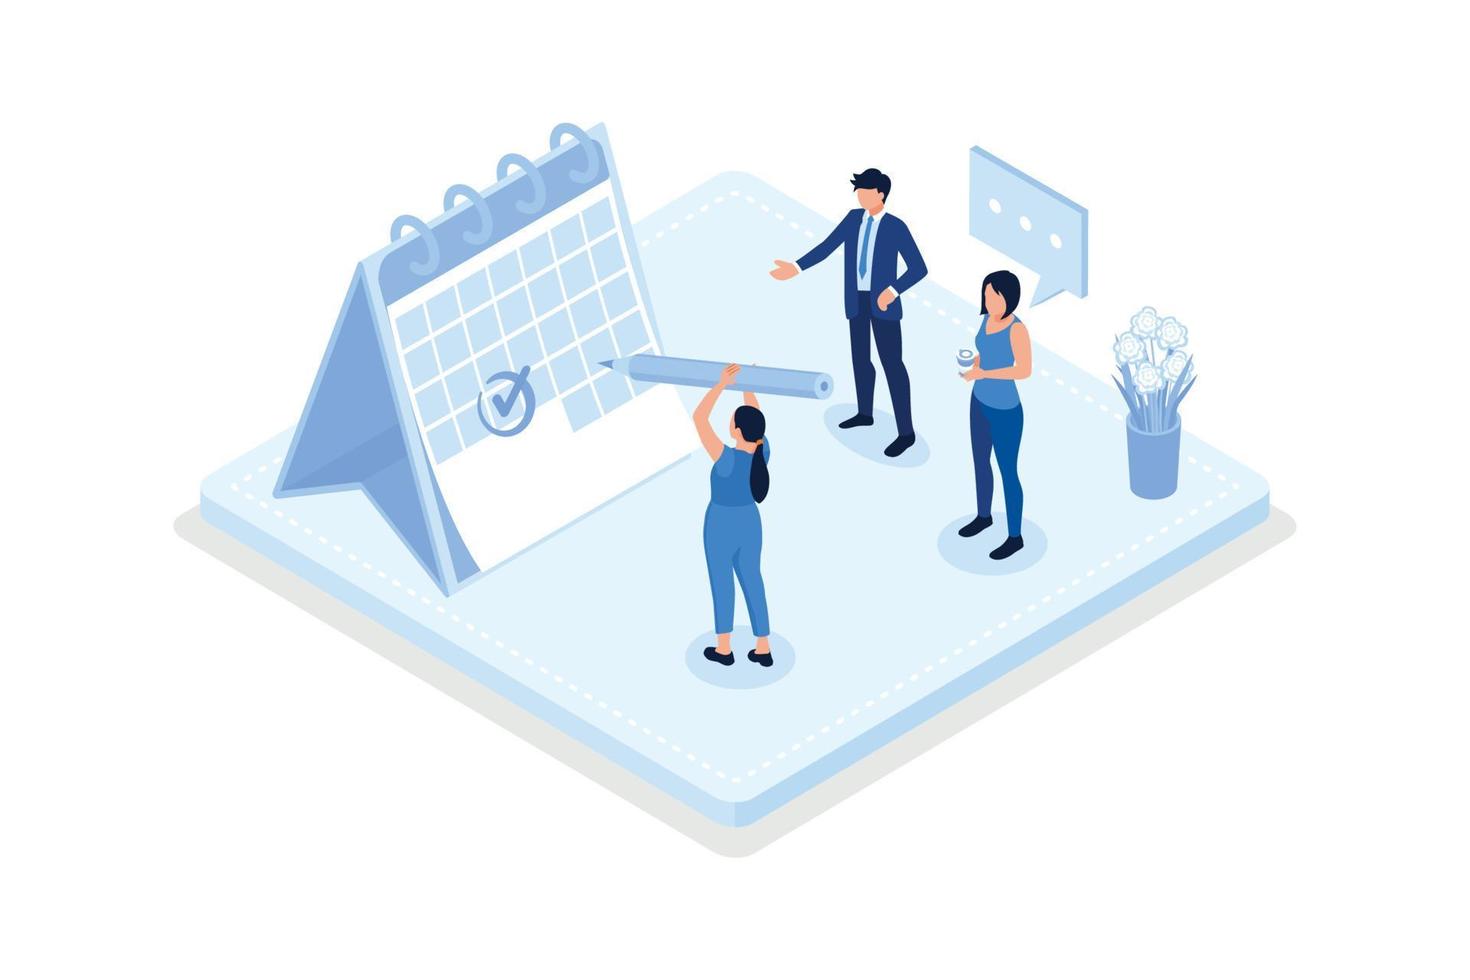 Characters planning schedule, managing to do tasks and time. Time management and schedule organization concept, isometric vector modern illustration